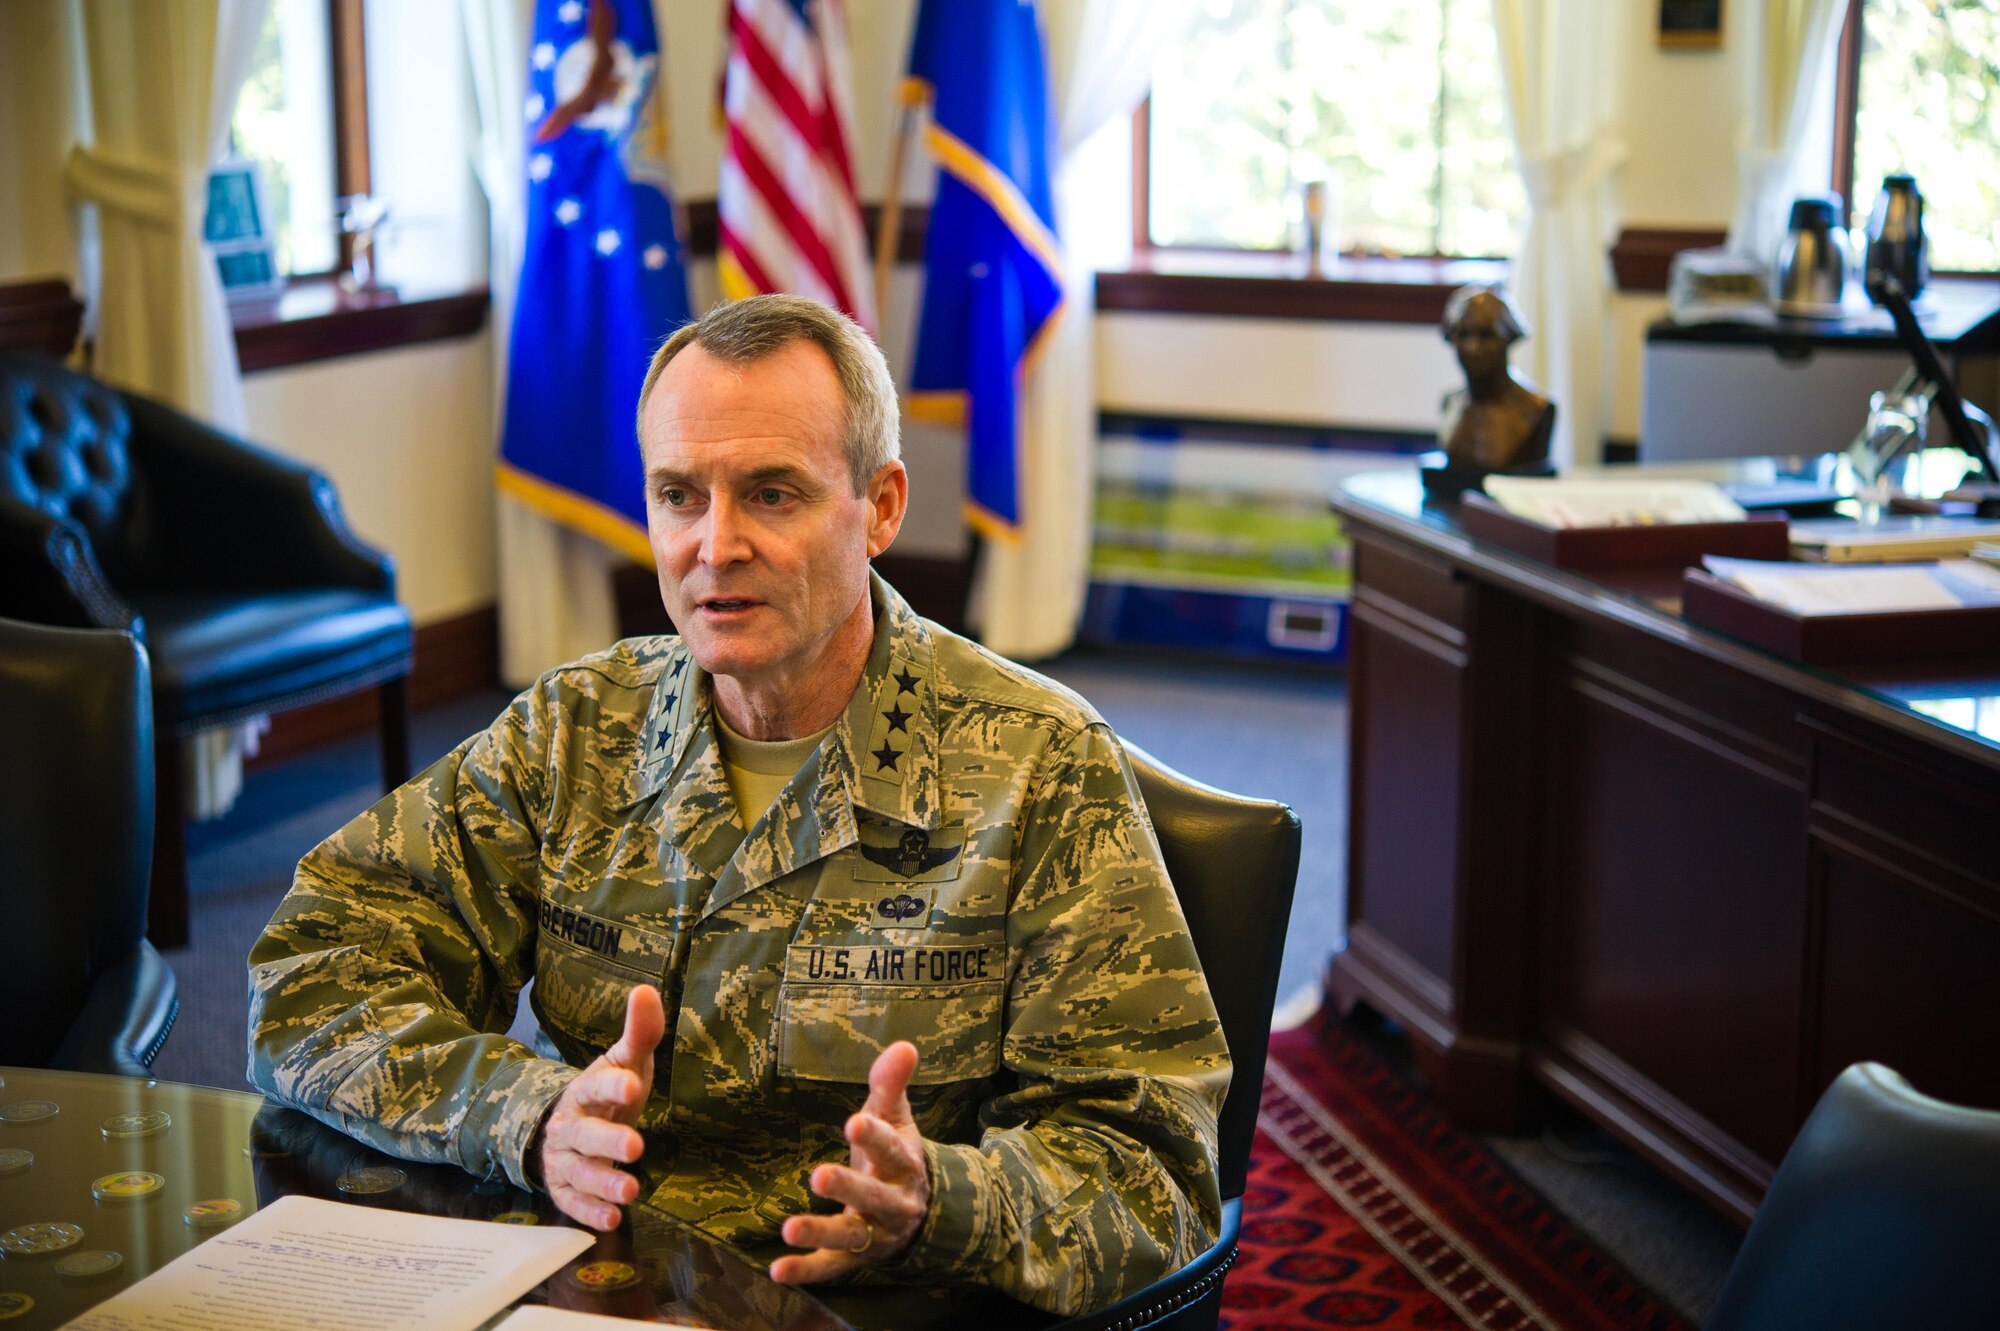 Lt. Gen. Darryl Roberson, commander of Air Education and Training Command, discusses his  philosophy on safety and mishap prevention during an interview at Joint Base San Antonio-Randolph, Nov. 23, 2015. (U.S. Air Force photo by Tech. Sgt. Sarayuth Pinthong)